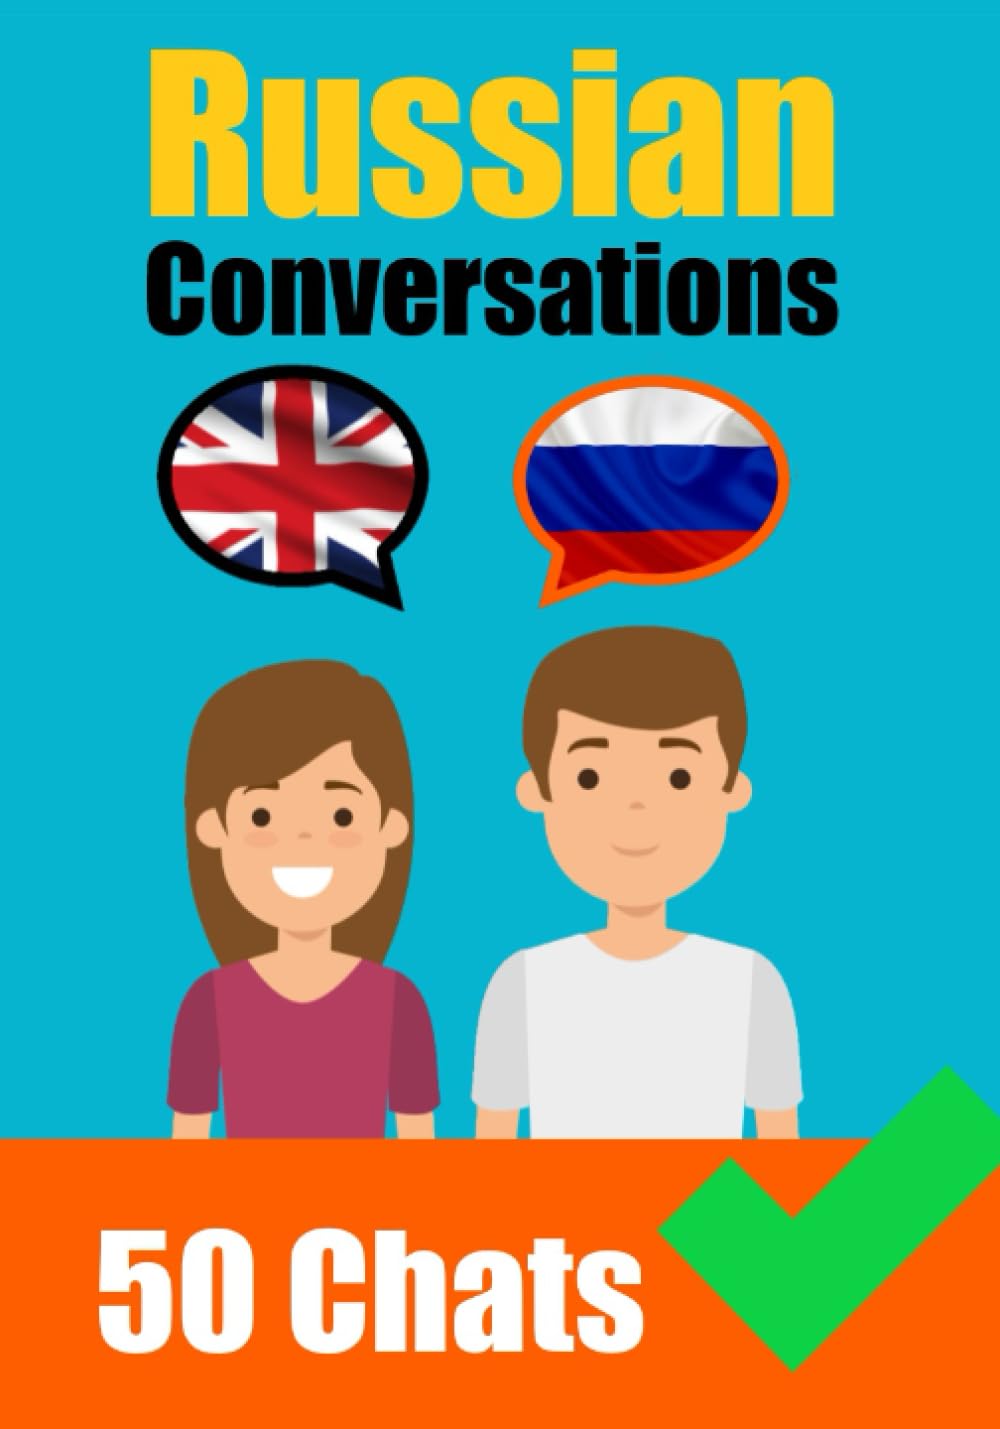 Conversations in Russian | English and Russian Conversations Side by Side - Skriuwer.com